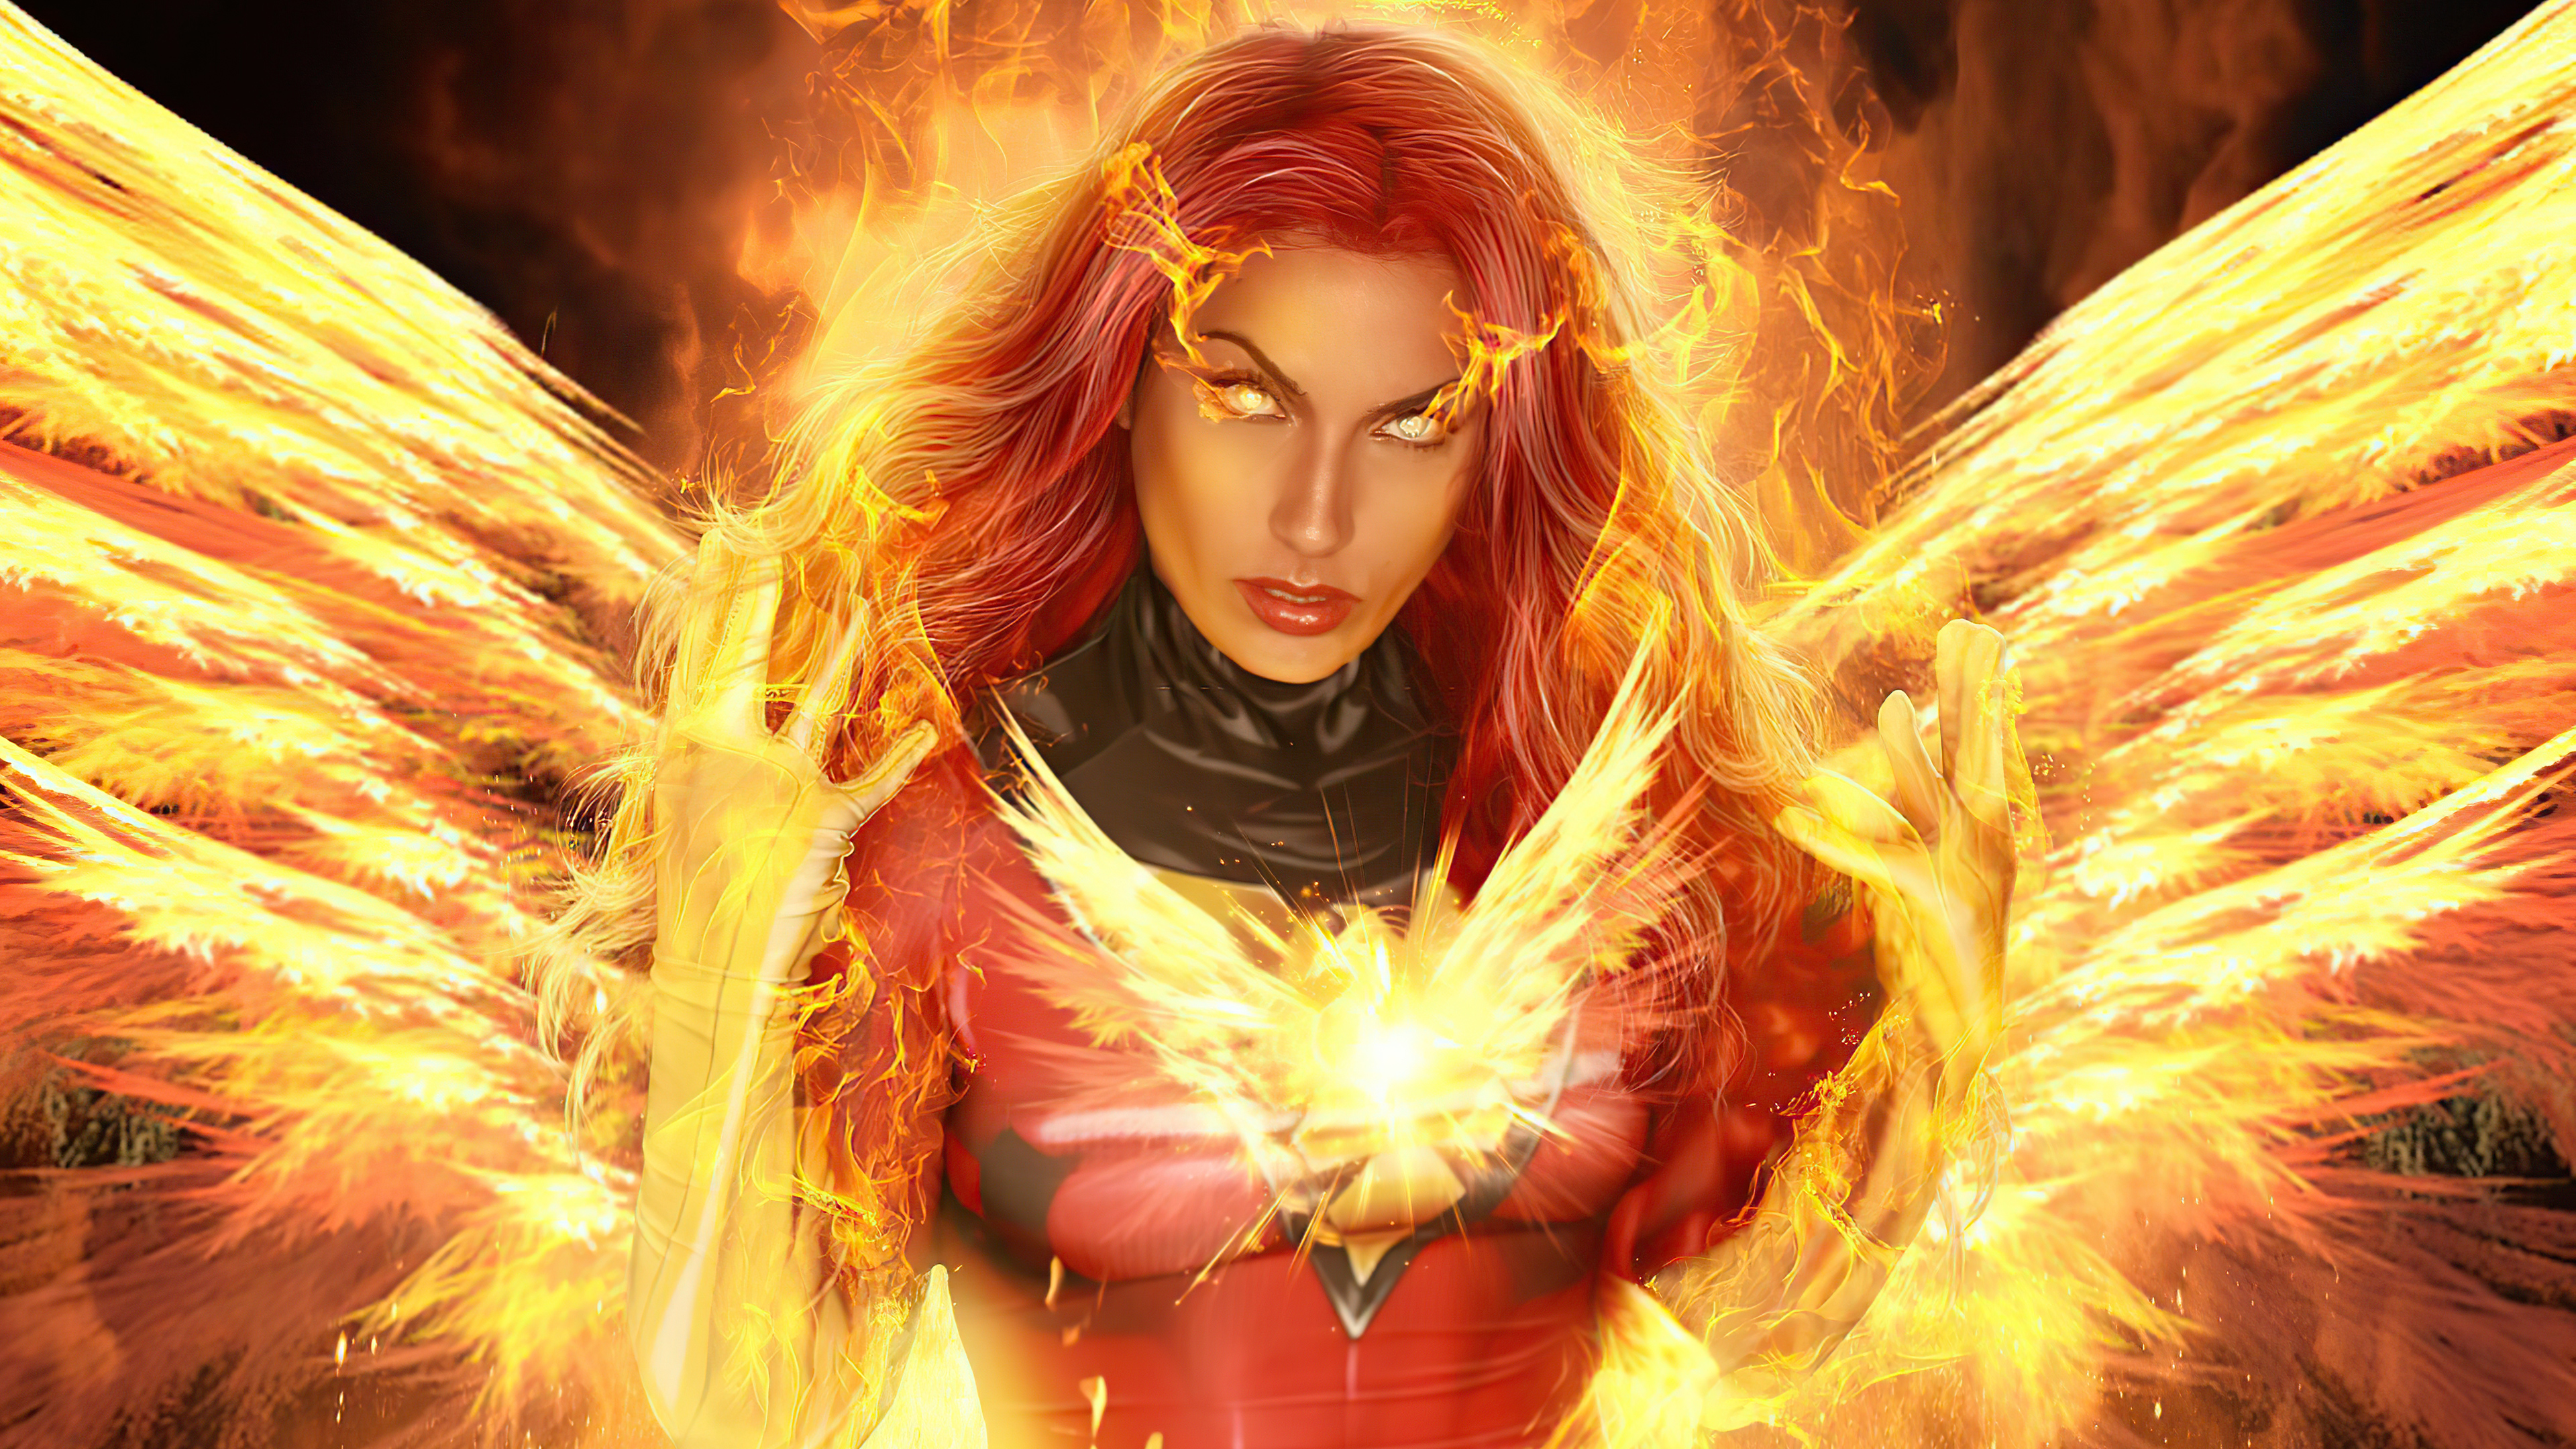 540x960 The Dark Phoenix Cosplay 4k 540x960 Resolution HD 4k Wallpapers,  Images, Backgrounds, Photos and Pictures